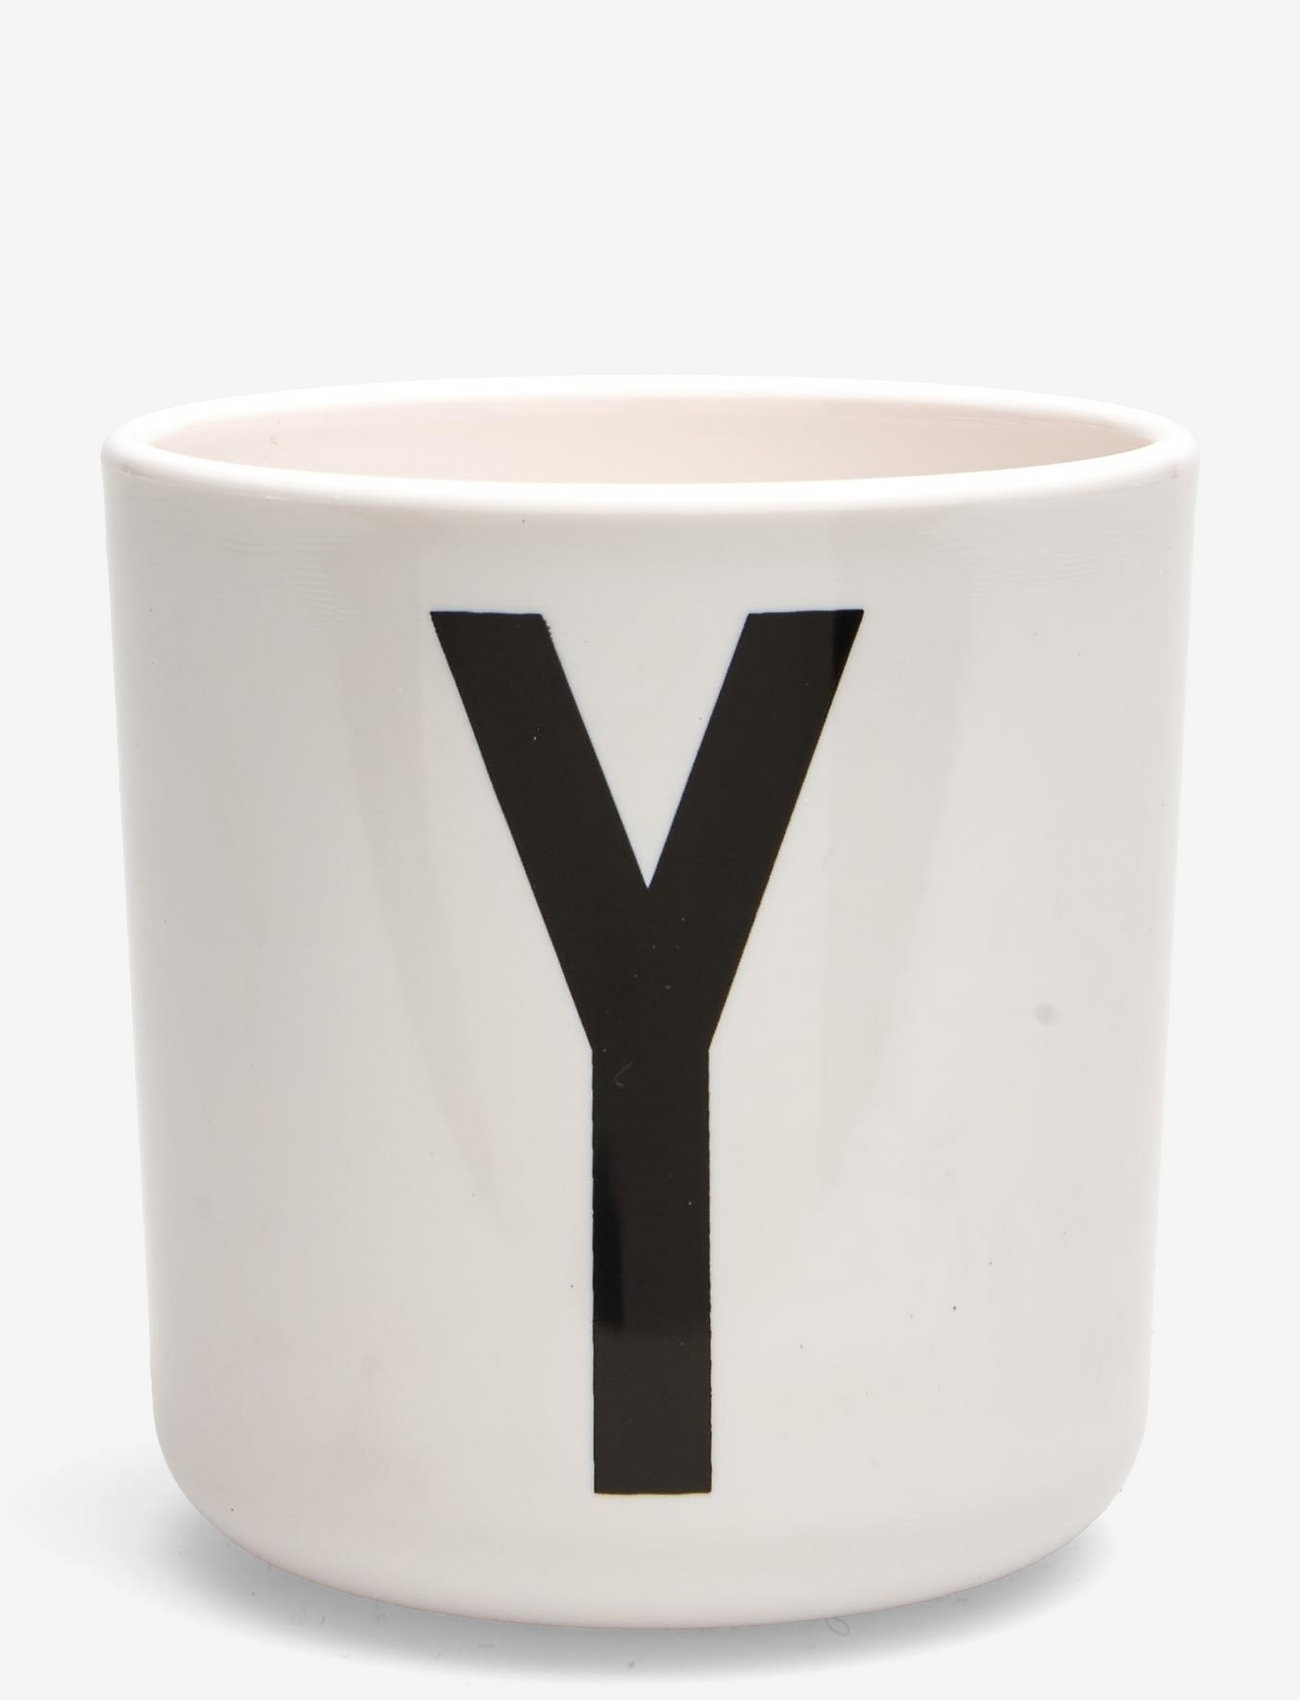 Design Letters - Kids Personal Eco Cup - cups - white - 0